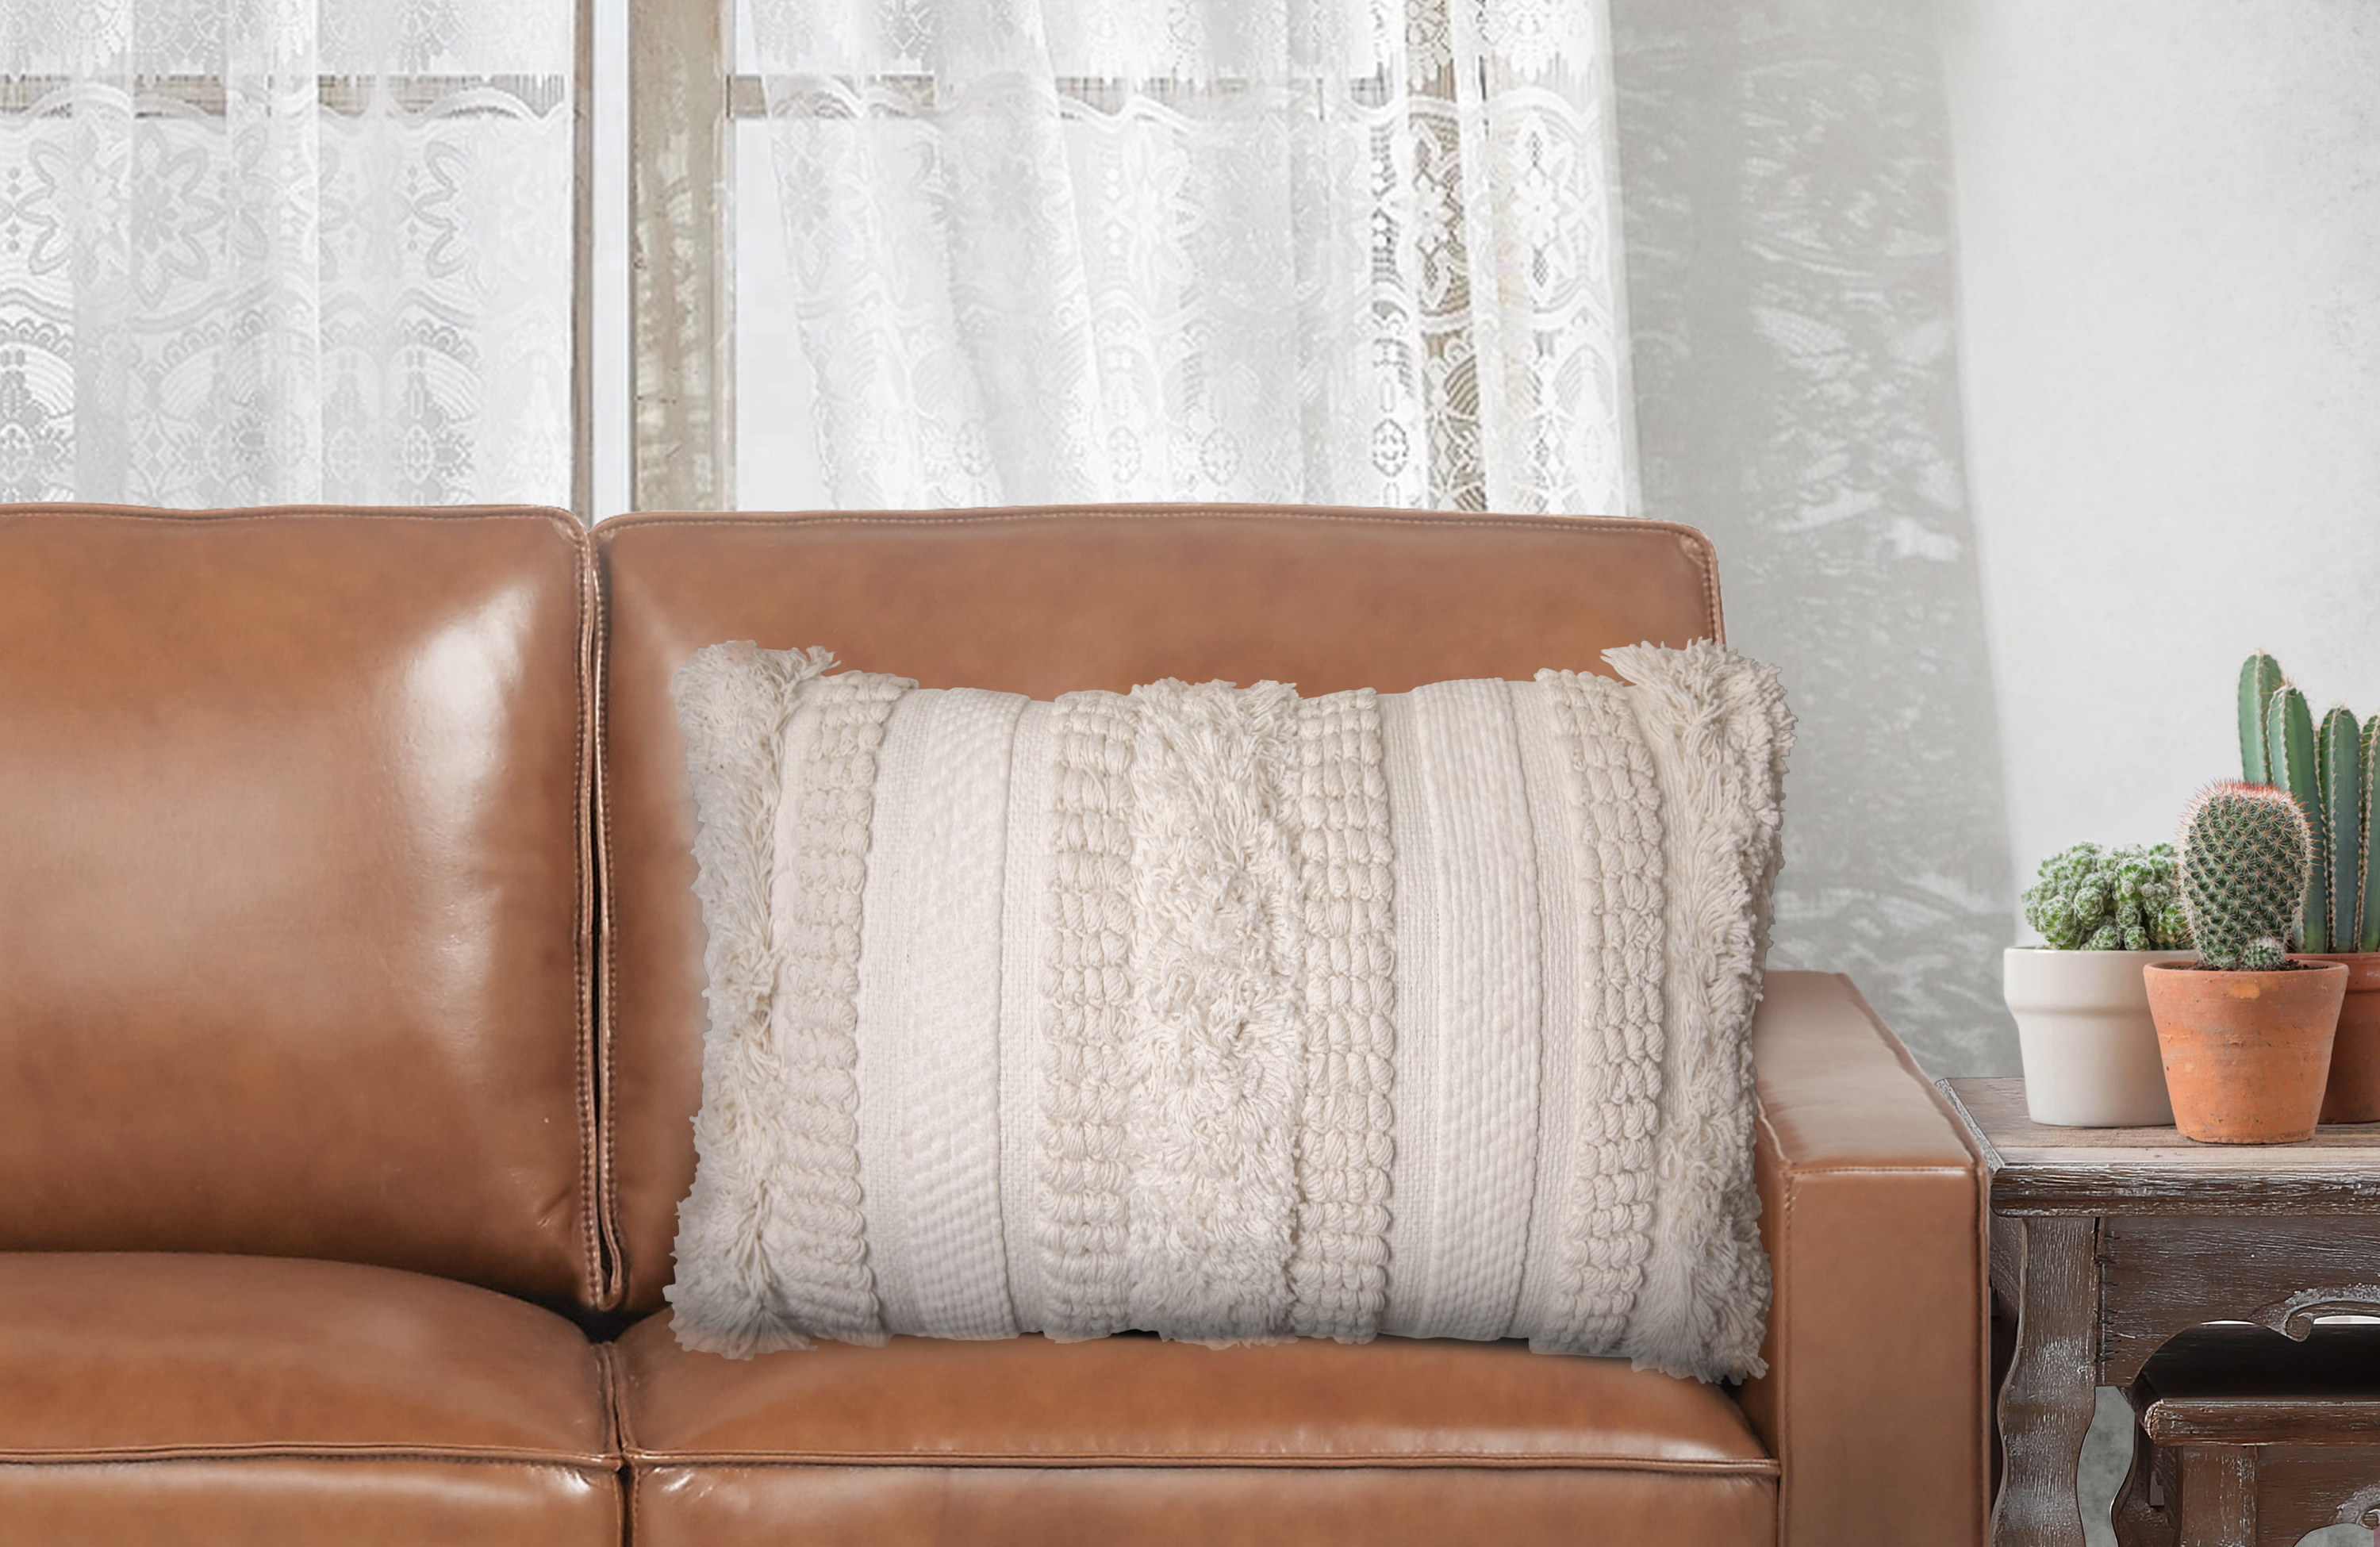 A white boho textured pillow on a brown couch